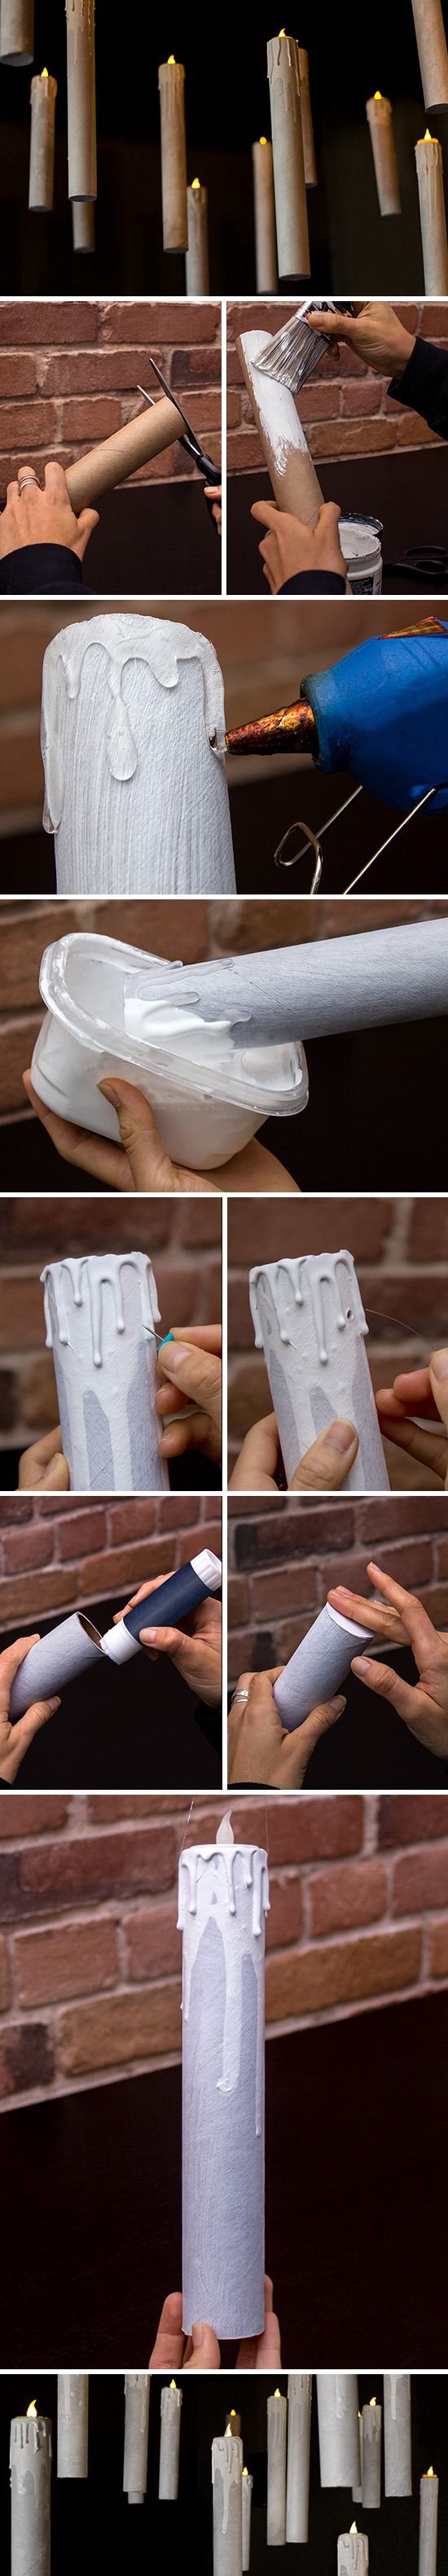 Harry potter Soaring Candles Made From Paper Towel Rolls. 